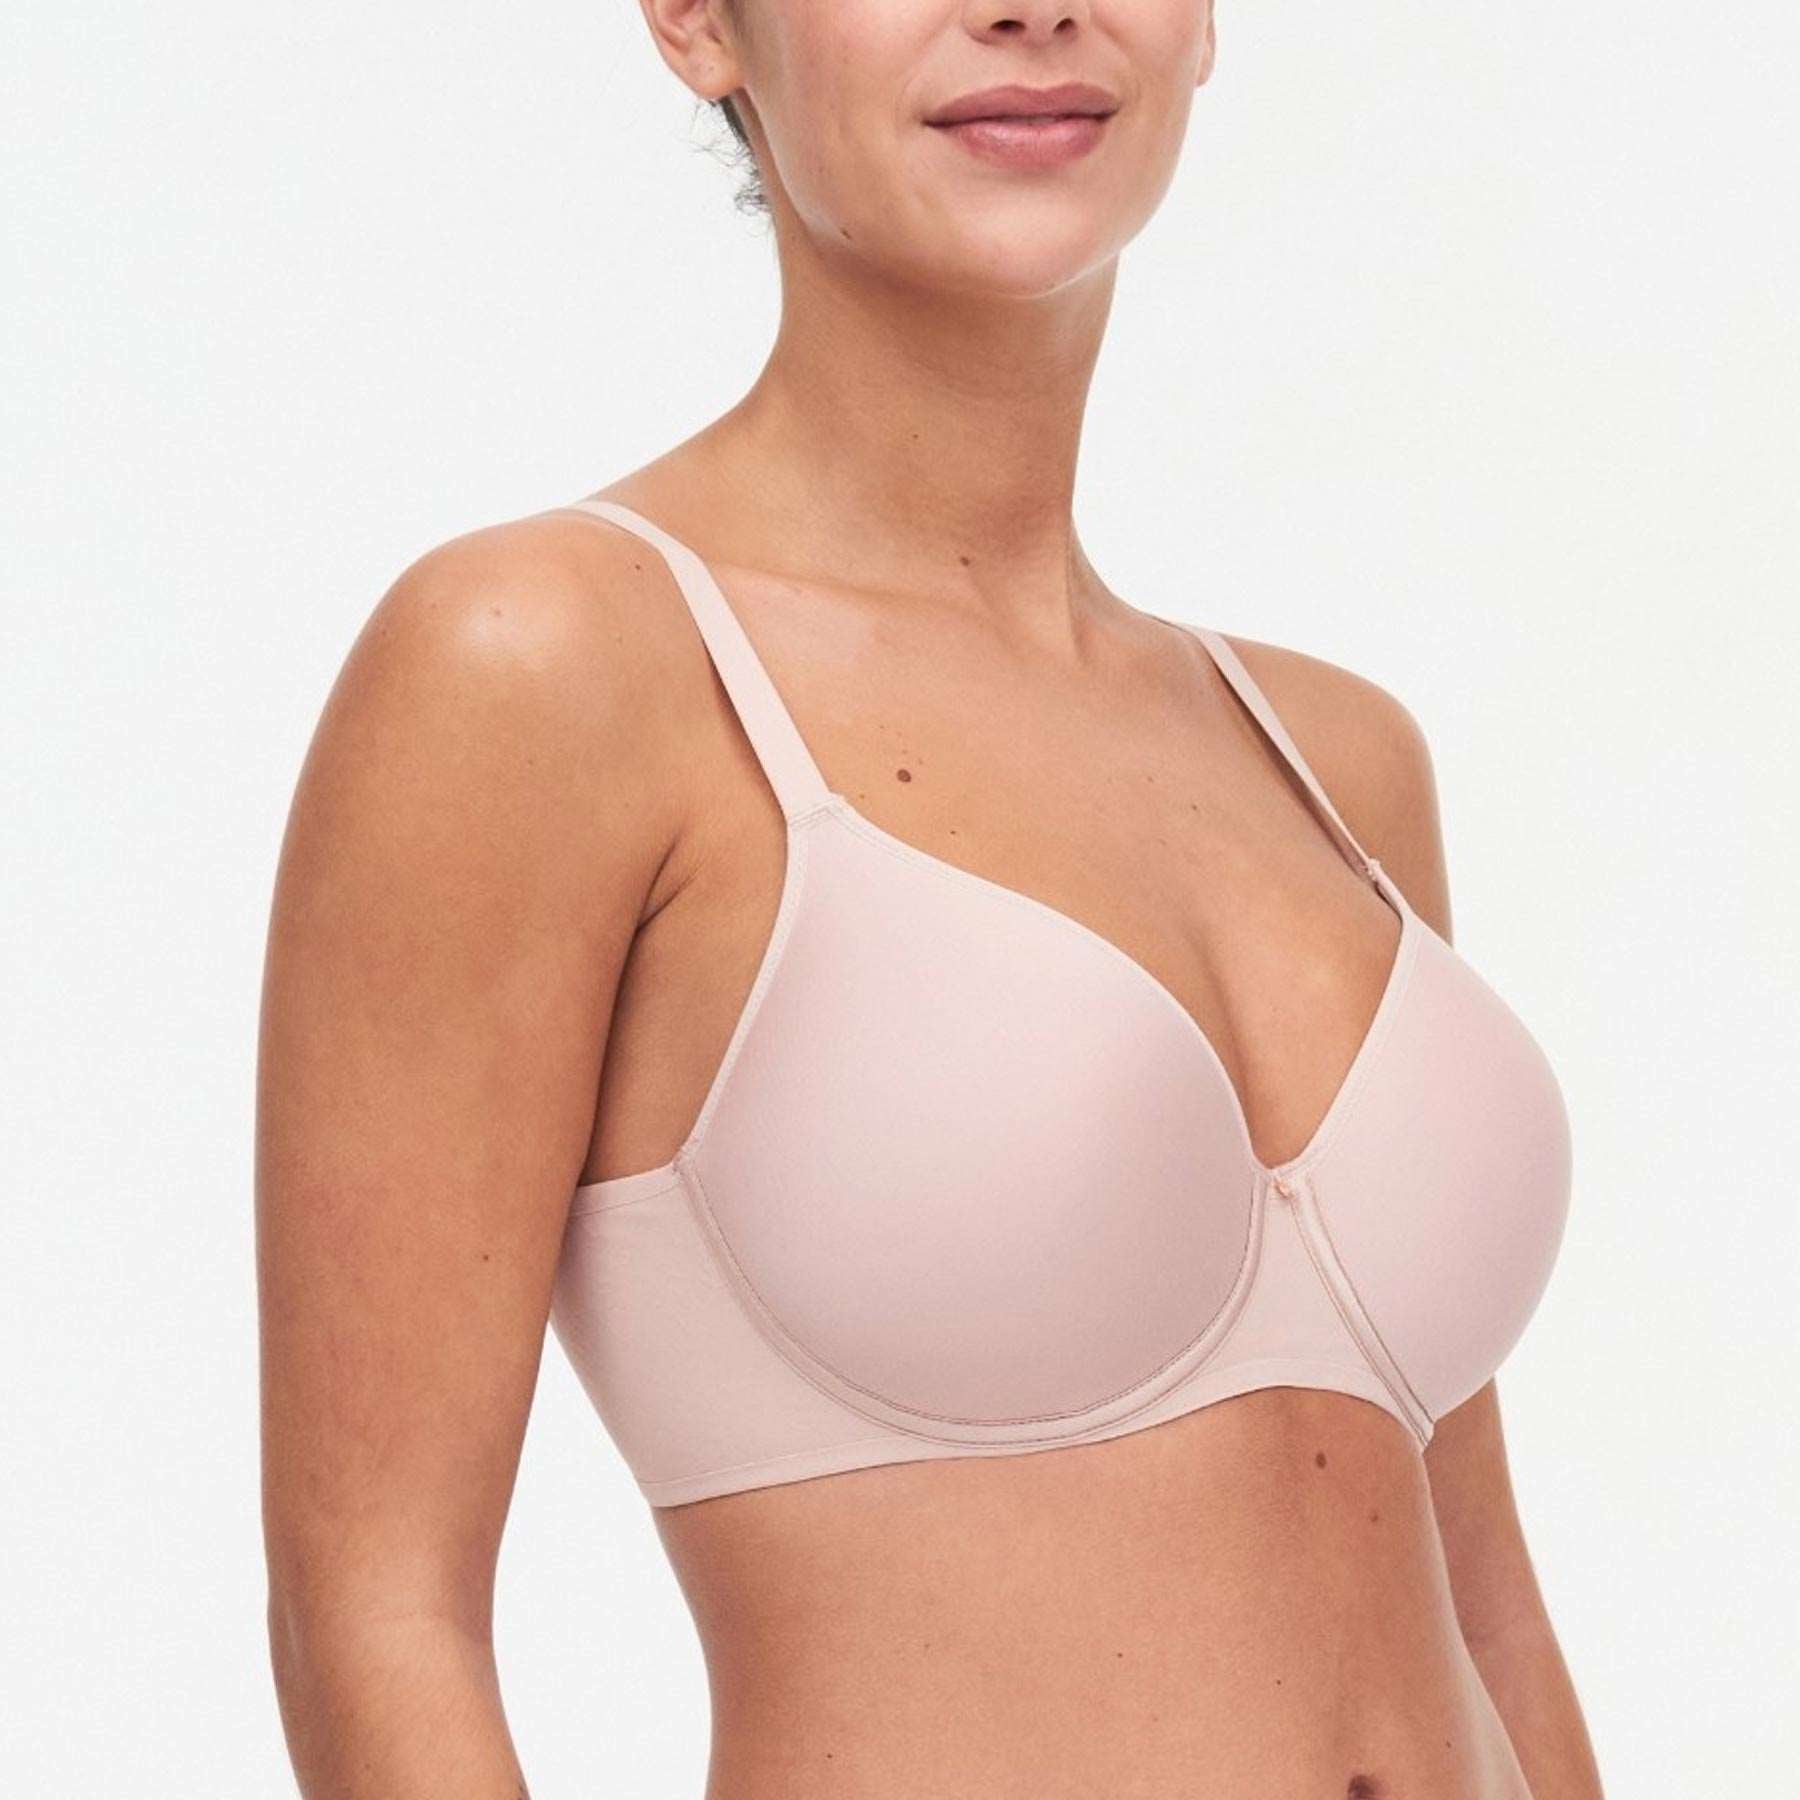 CHANTELLE T-shirt bra ESSENTIAL in nude